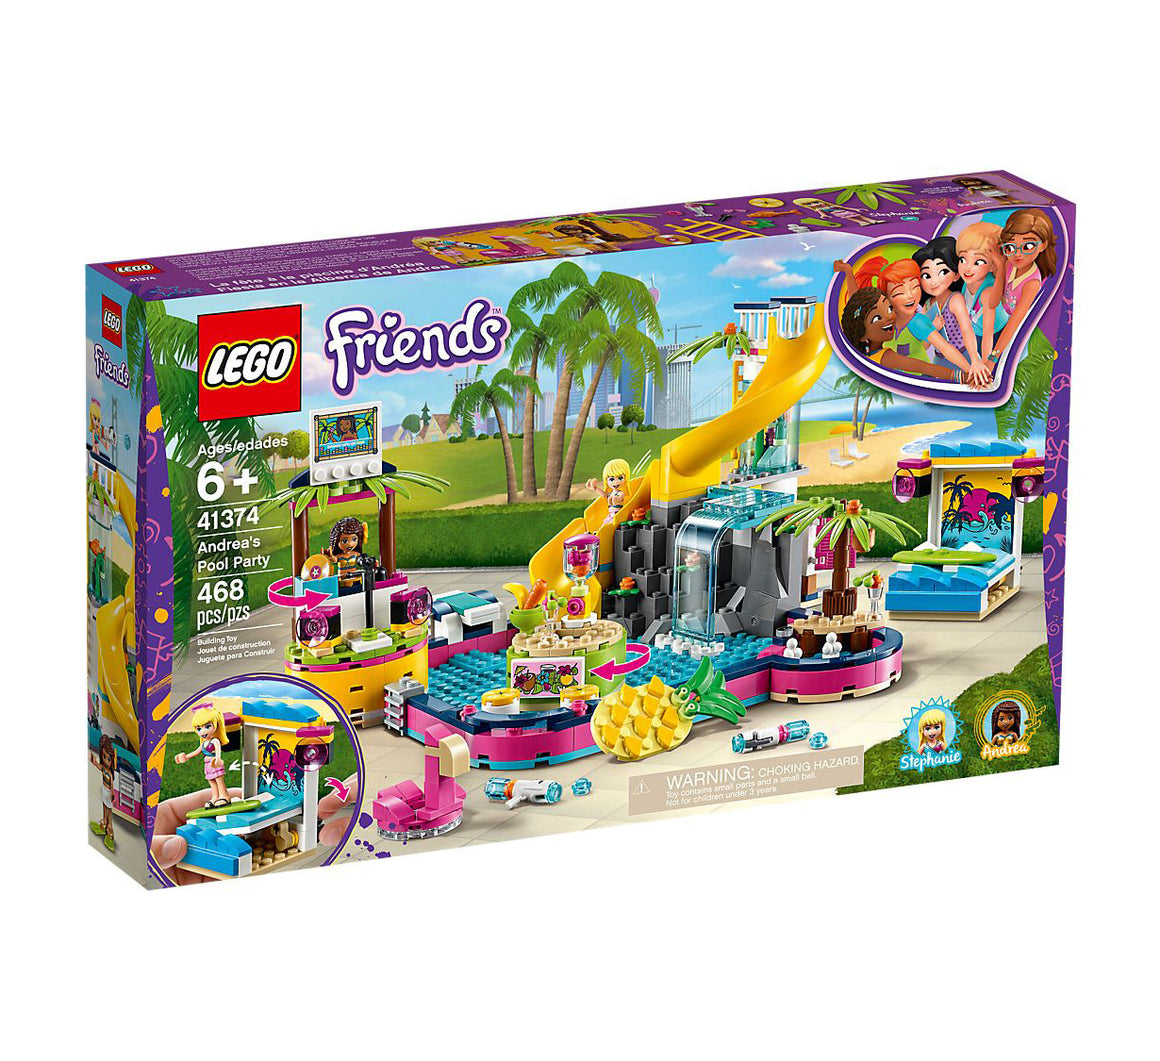 Lego Friends Andrea's Pool Party | 41374 - Sam Turner & Sons